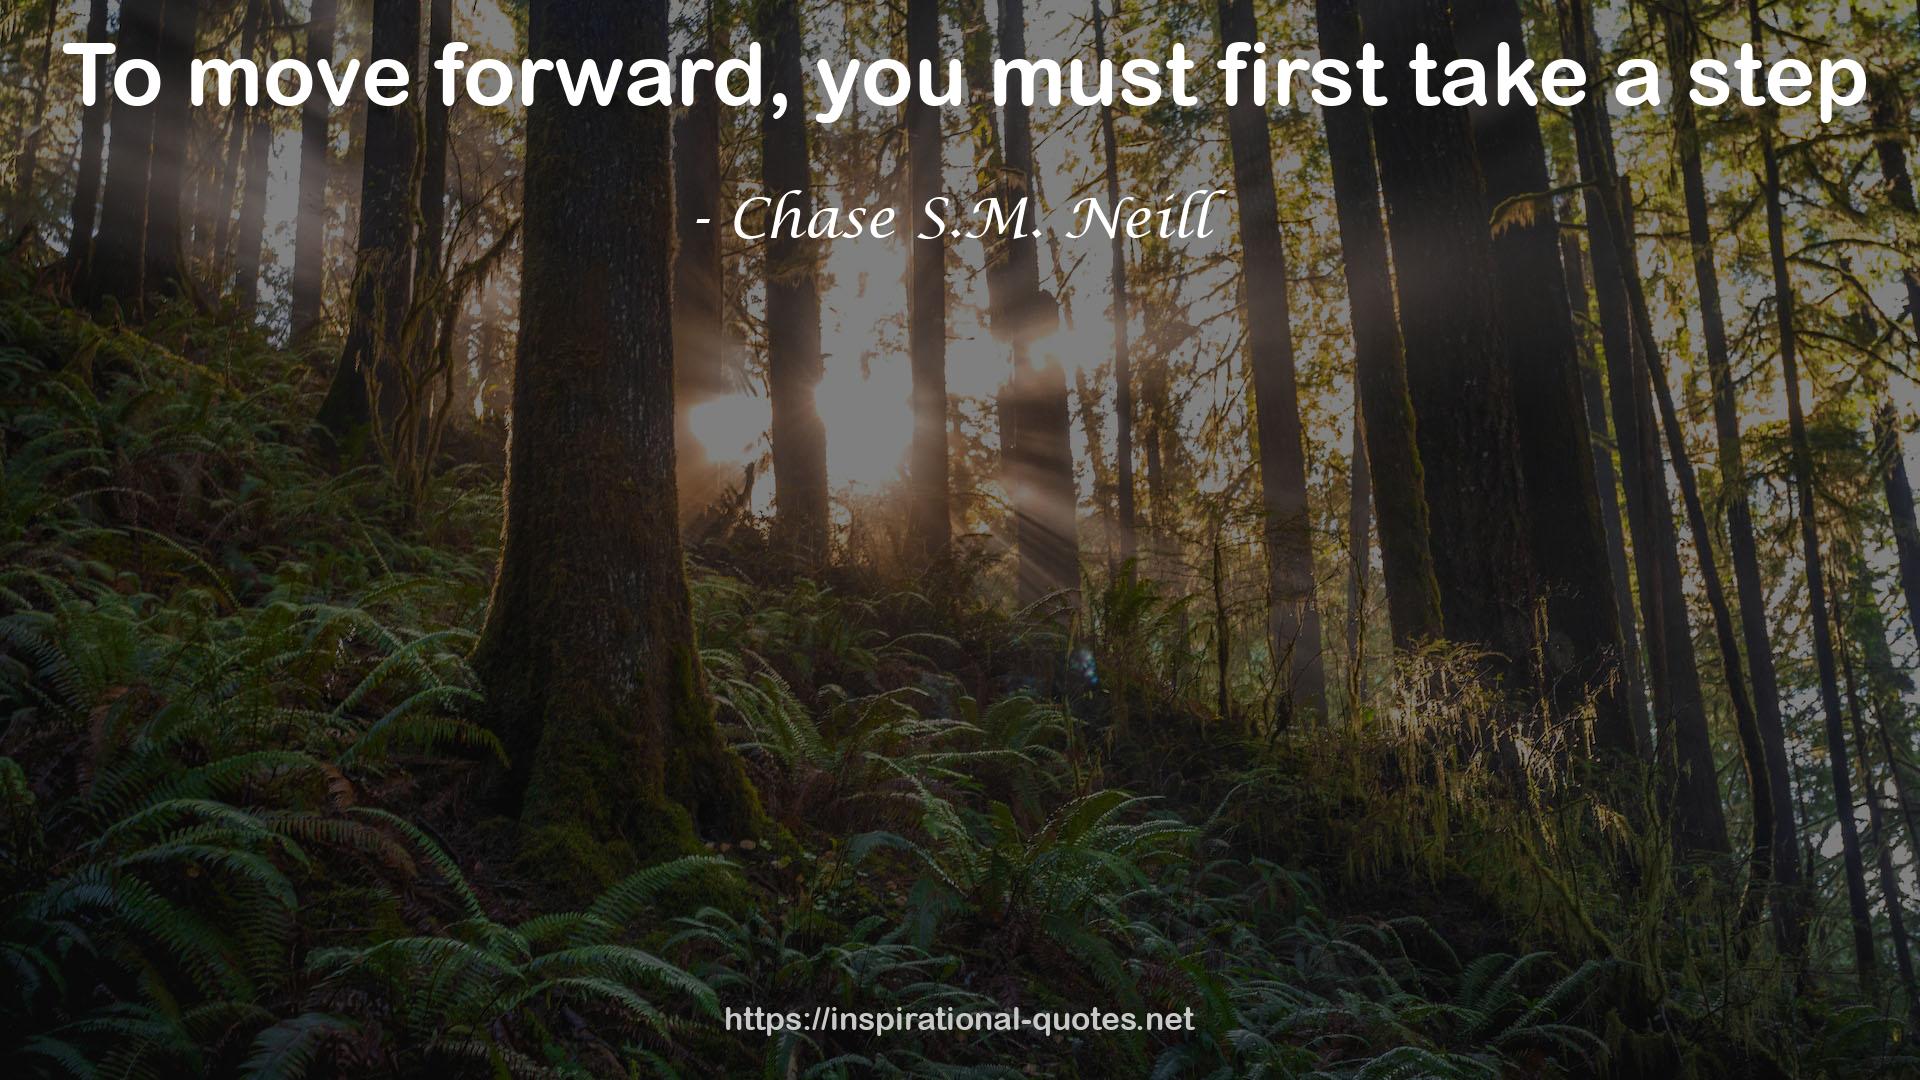 Chase S.M. Neill QUOTES